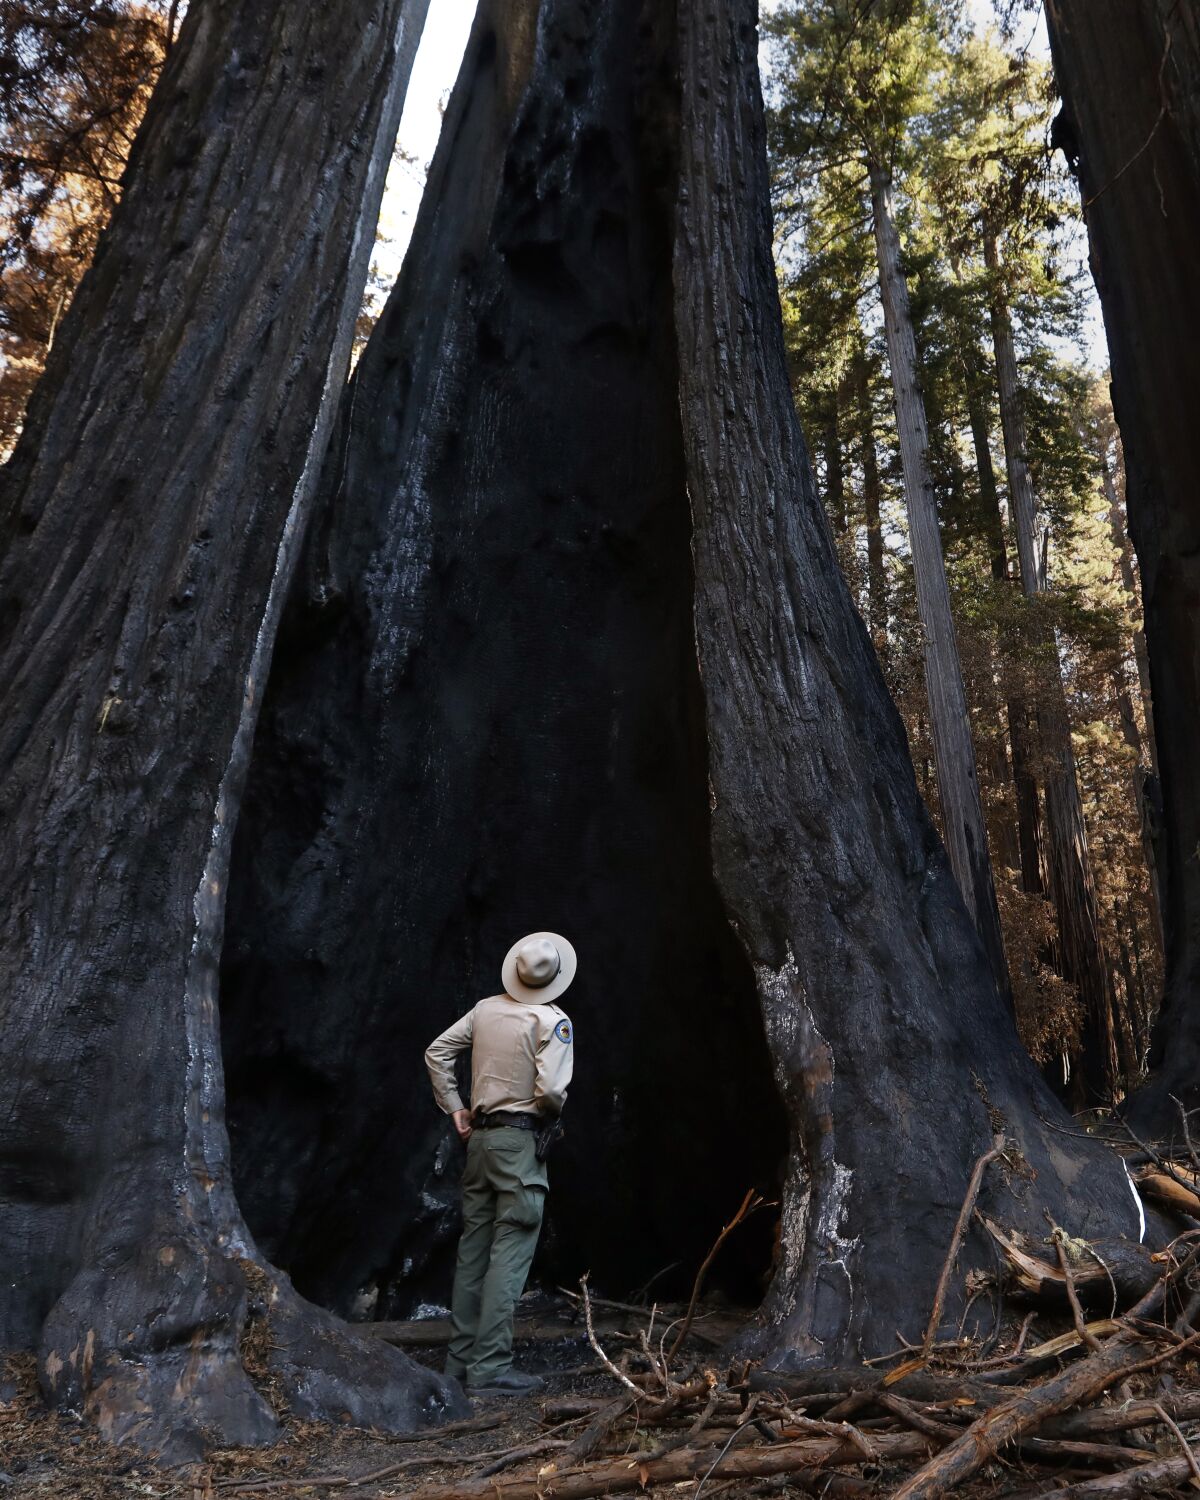 Ranger Gabe McKenna looks at a redwood tree hit by a wildfire in Big Basin Redwoods State Park.